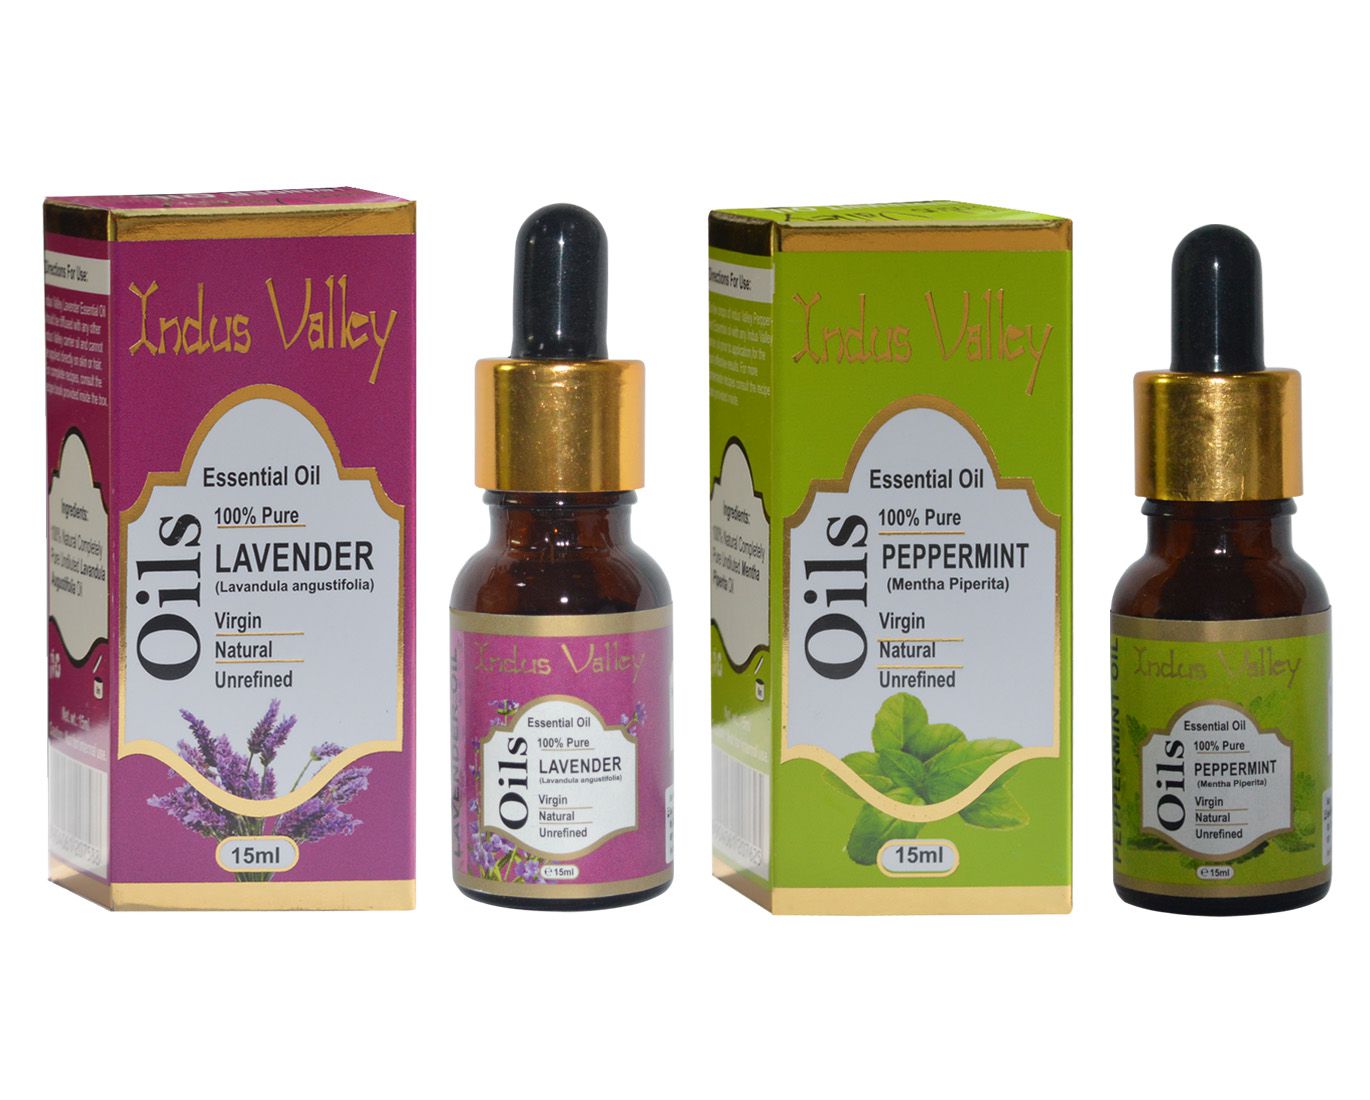     			Indus Valley Peppermint and Lavender Essential Oil Combo Pack